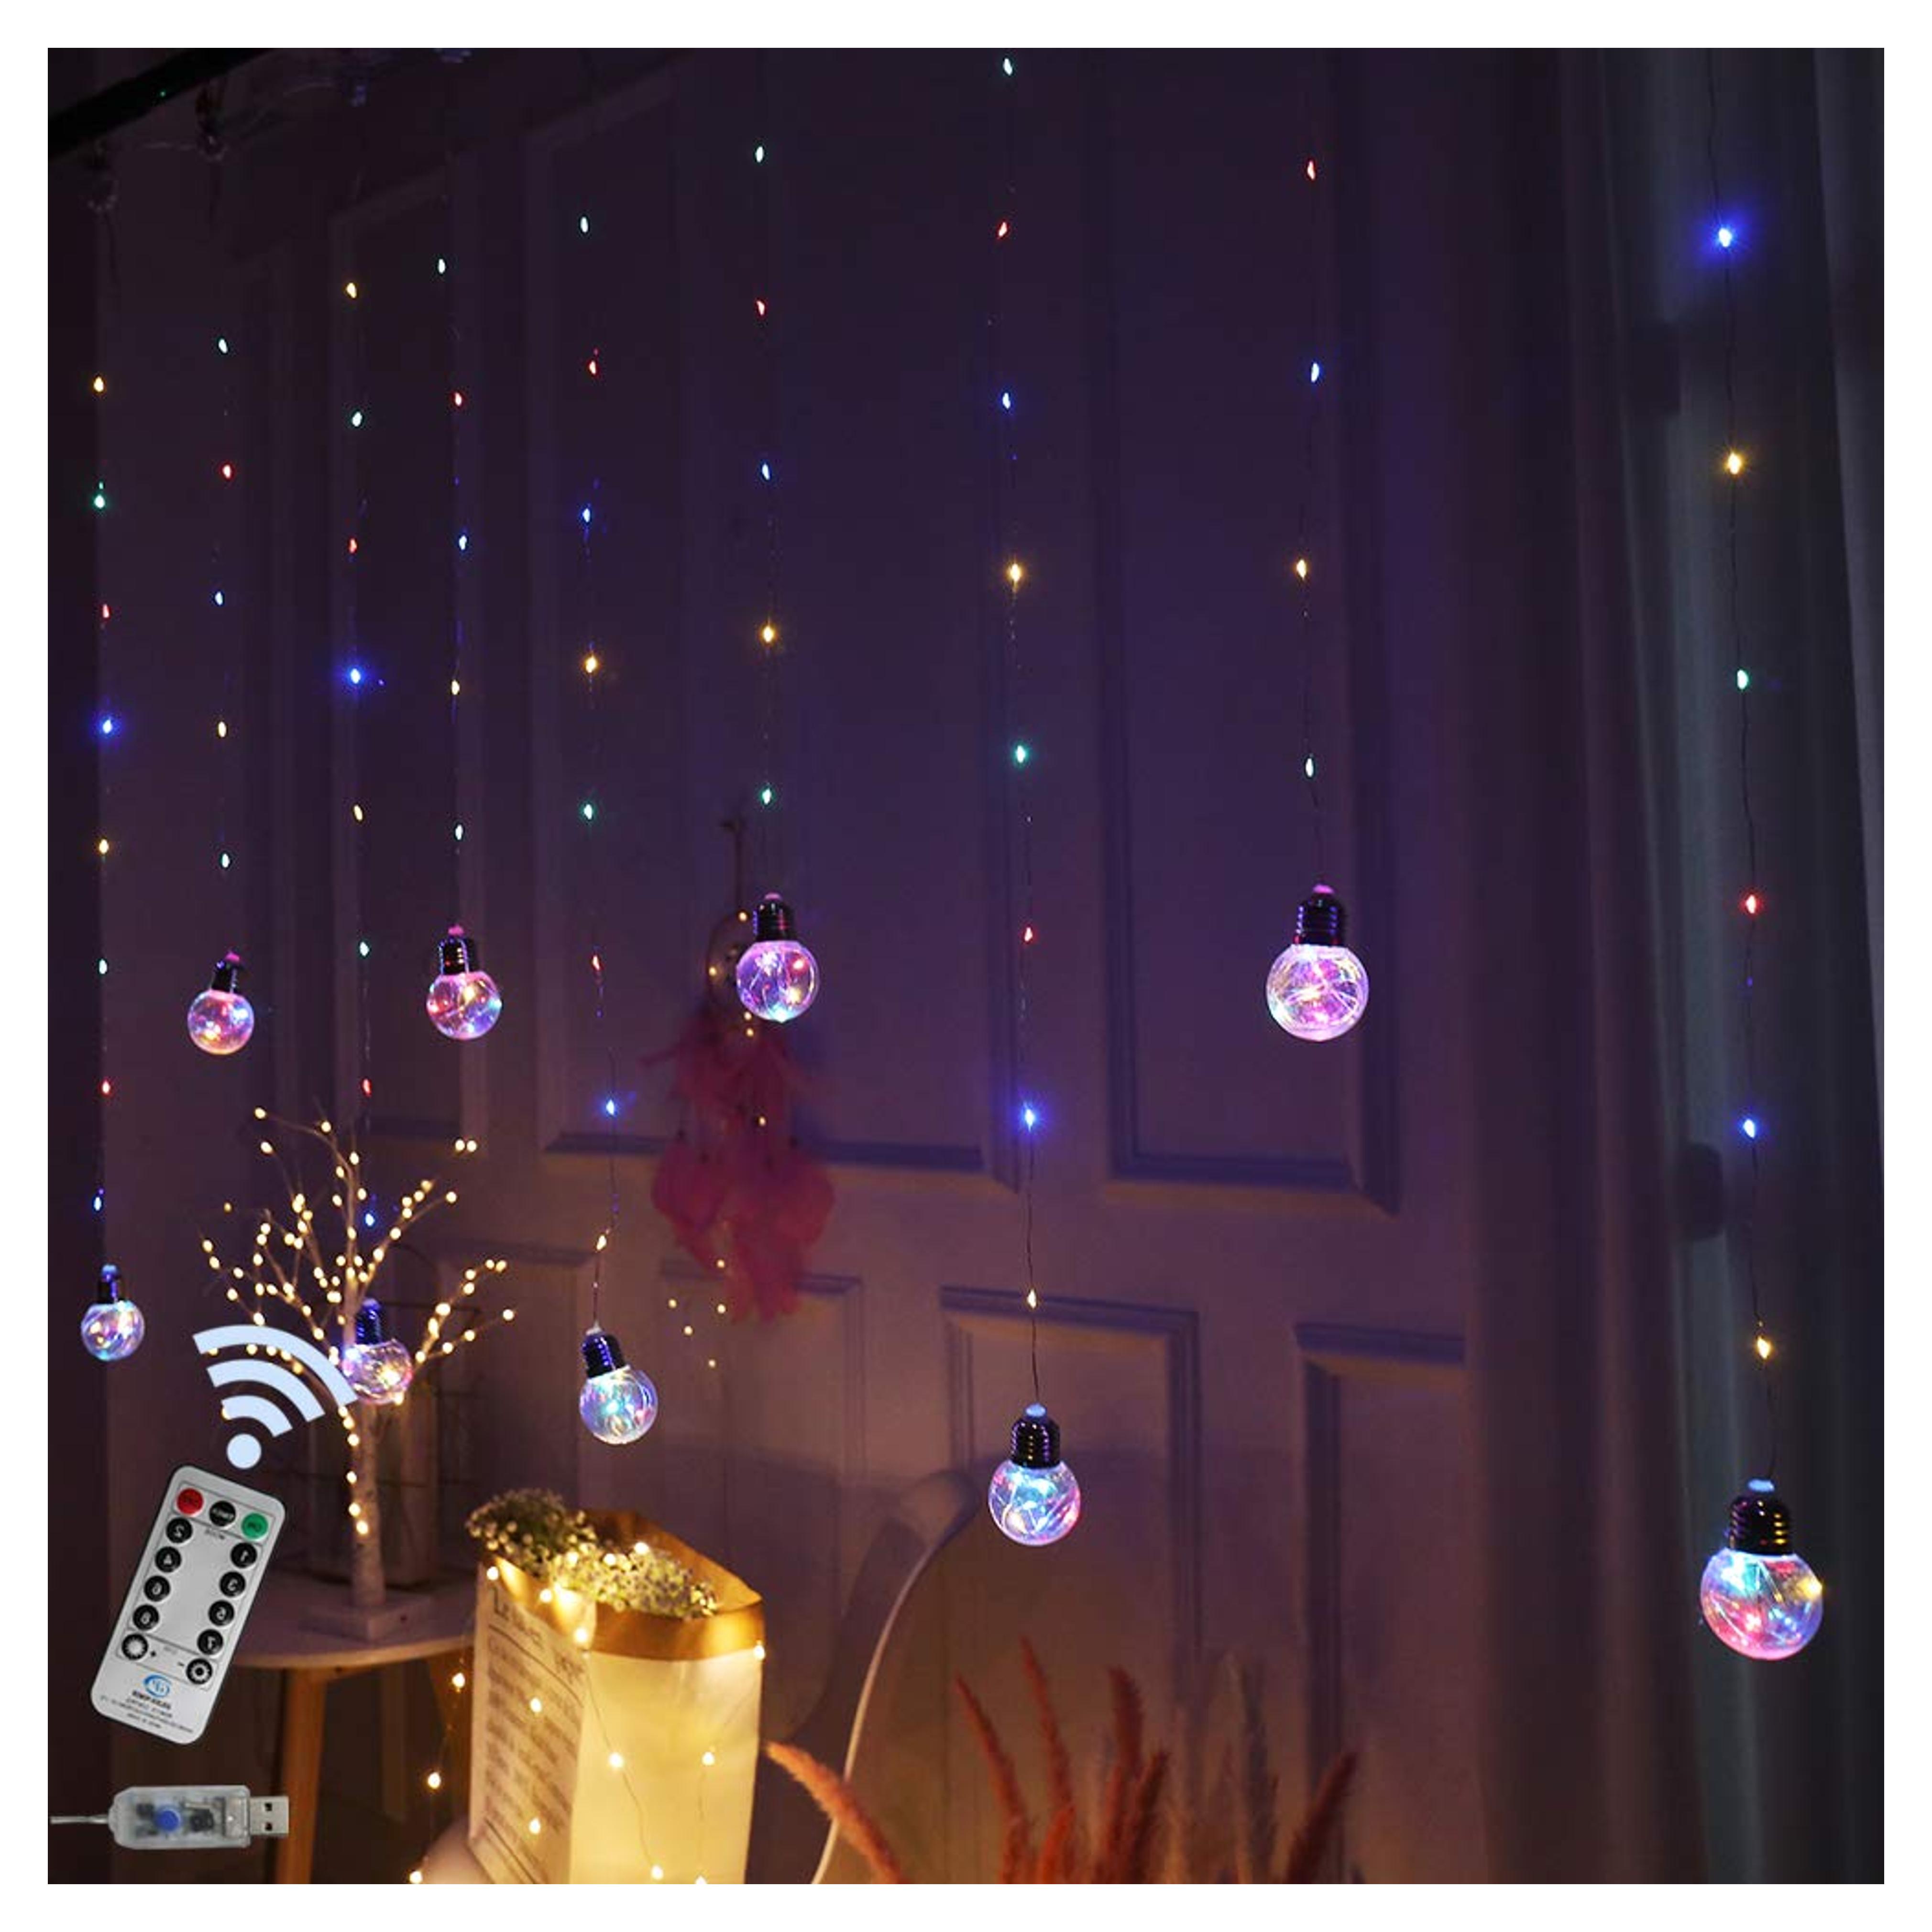 Obrecis Wishing Ball Curtain Twinkle Starry Light 8 Modes USB Remote, Led Window Curtain String Light for Wedding Party, Halloween, Christmas Decorations (Four Color)